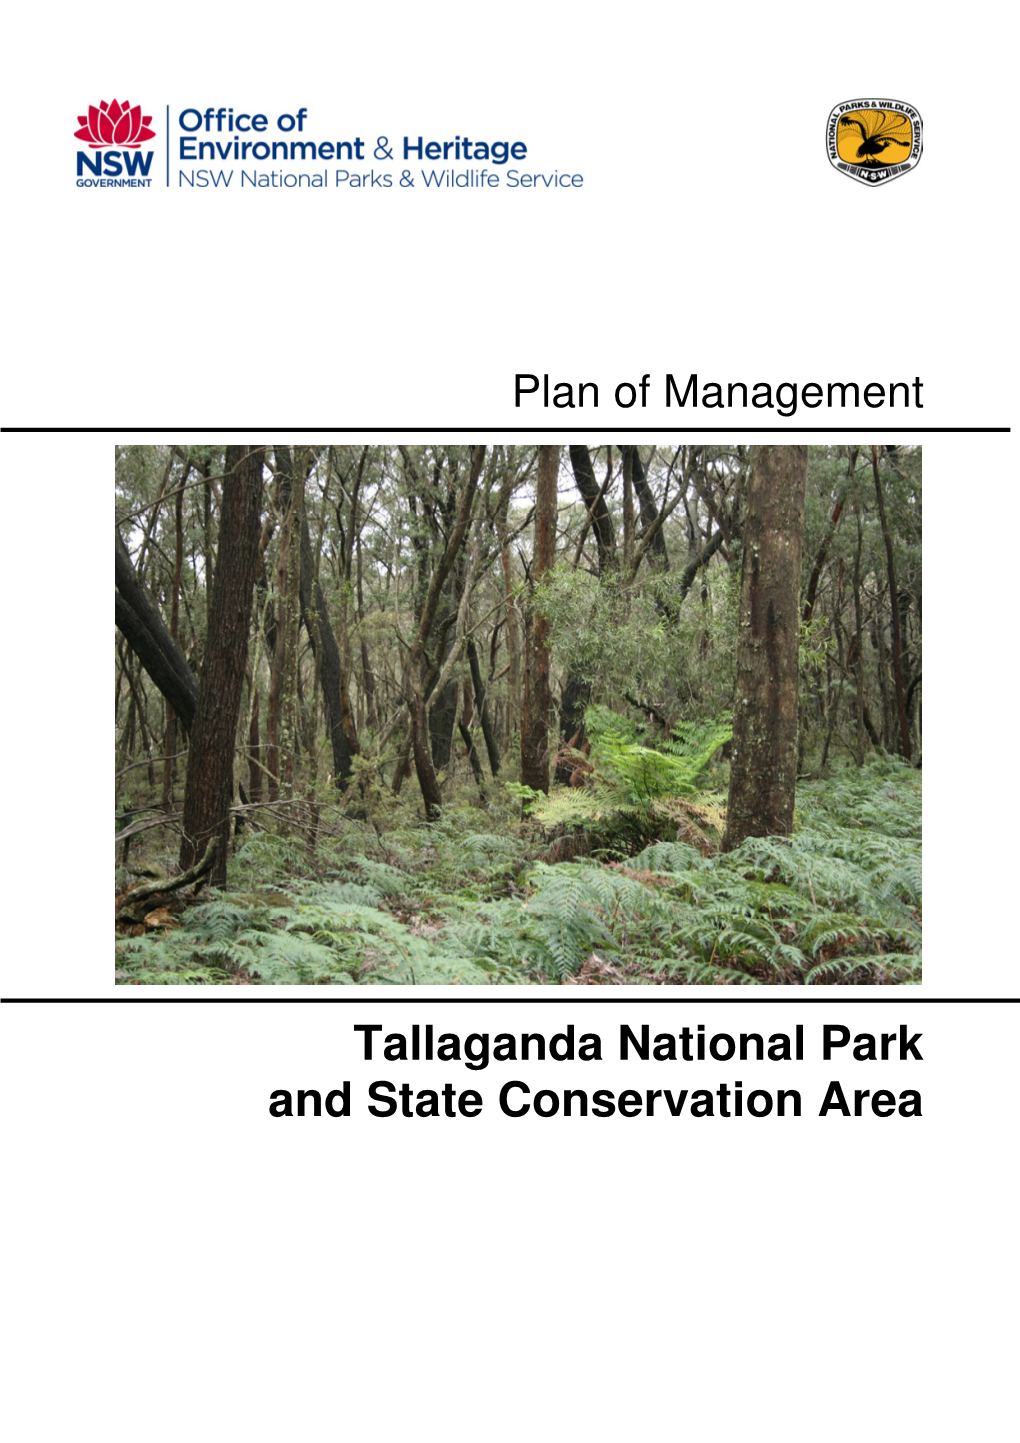 Tallaganda National Park and State Conservation Area Plan of Managementdownload